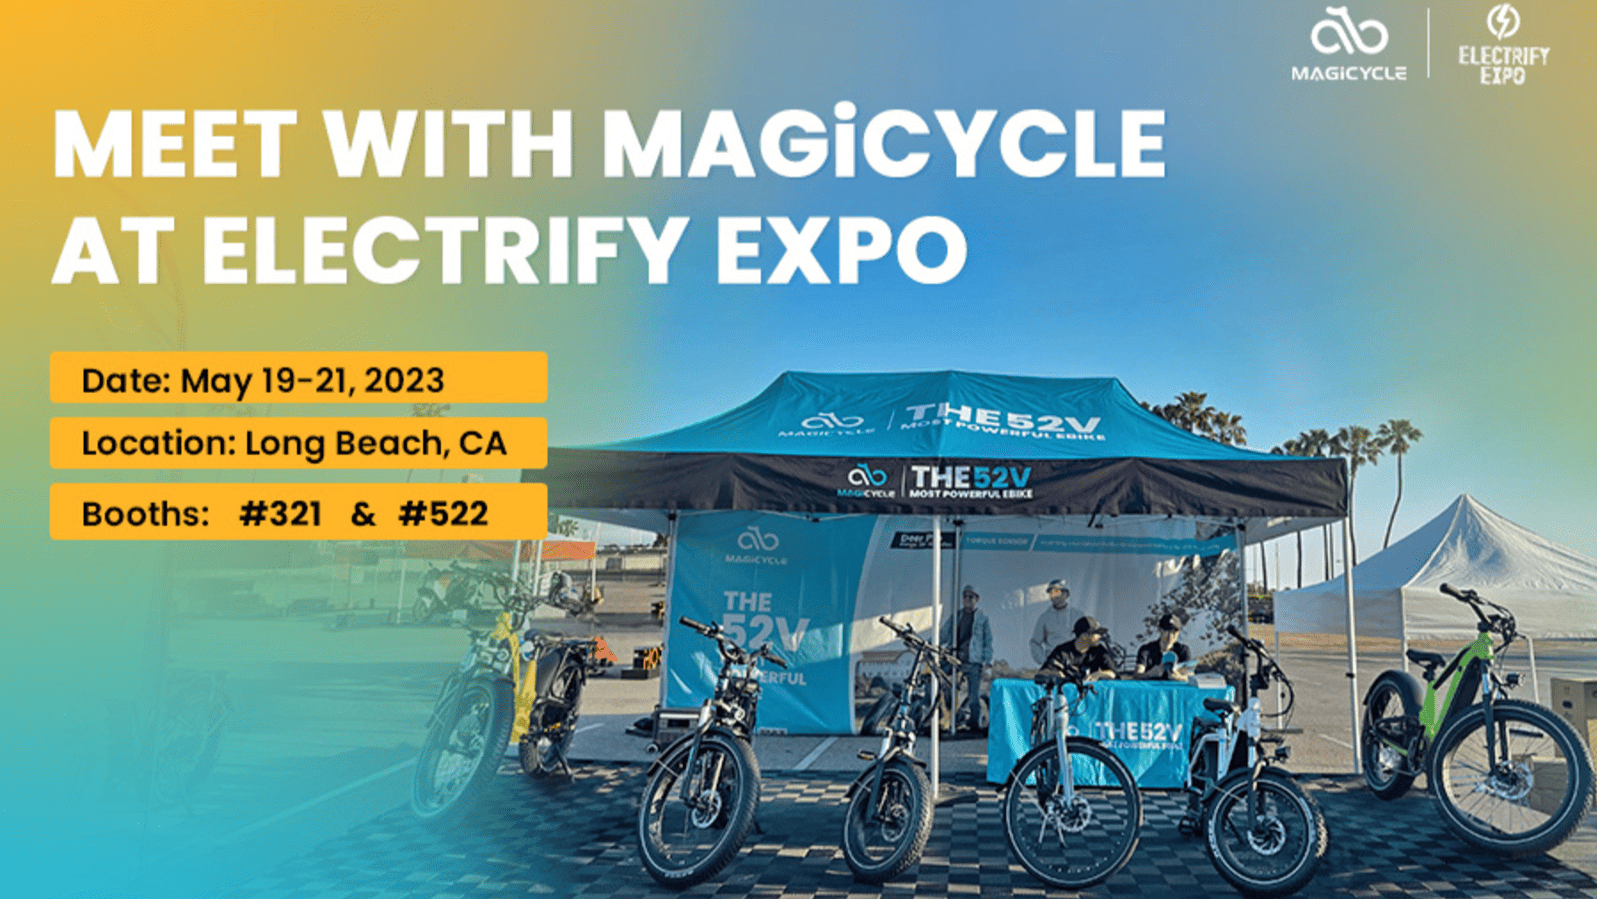 Meet Magicycle at the Electrify Expo 2023 in Long Beach